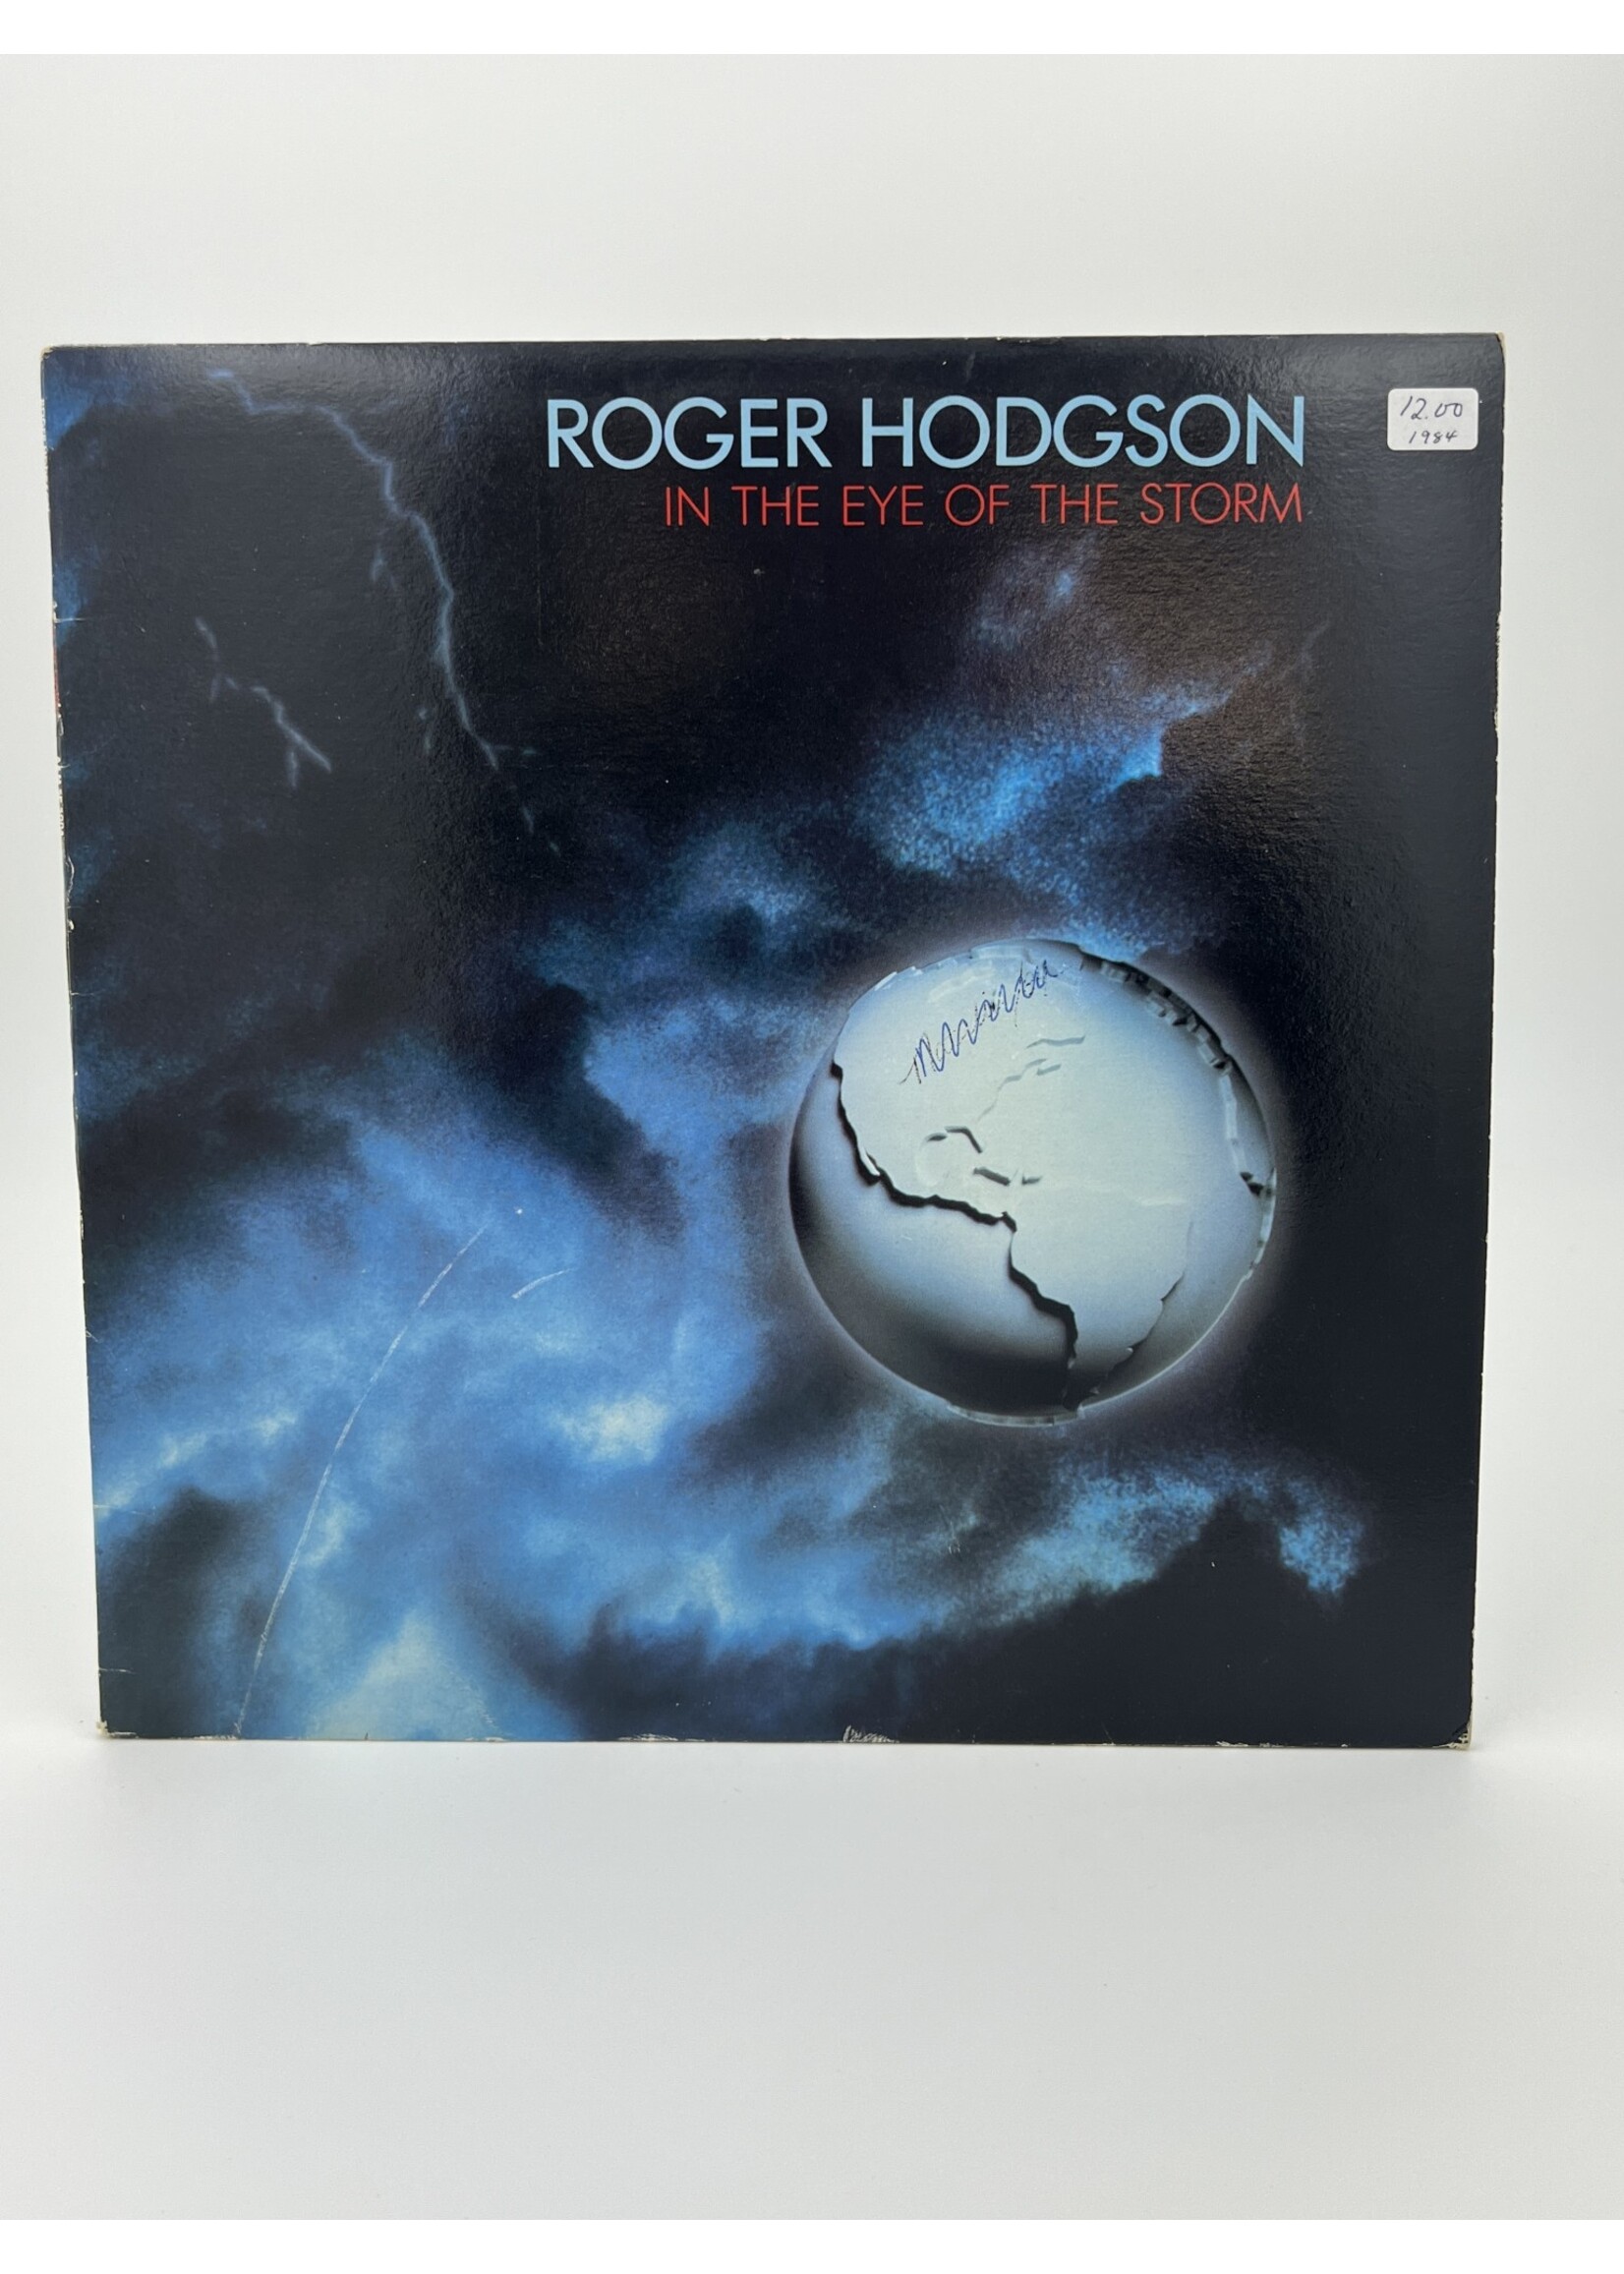 LP   Roger Hodgson In The Eye Of The Storm LP Record